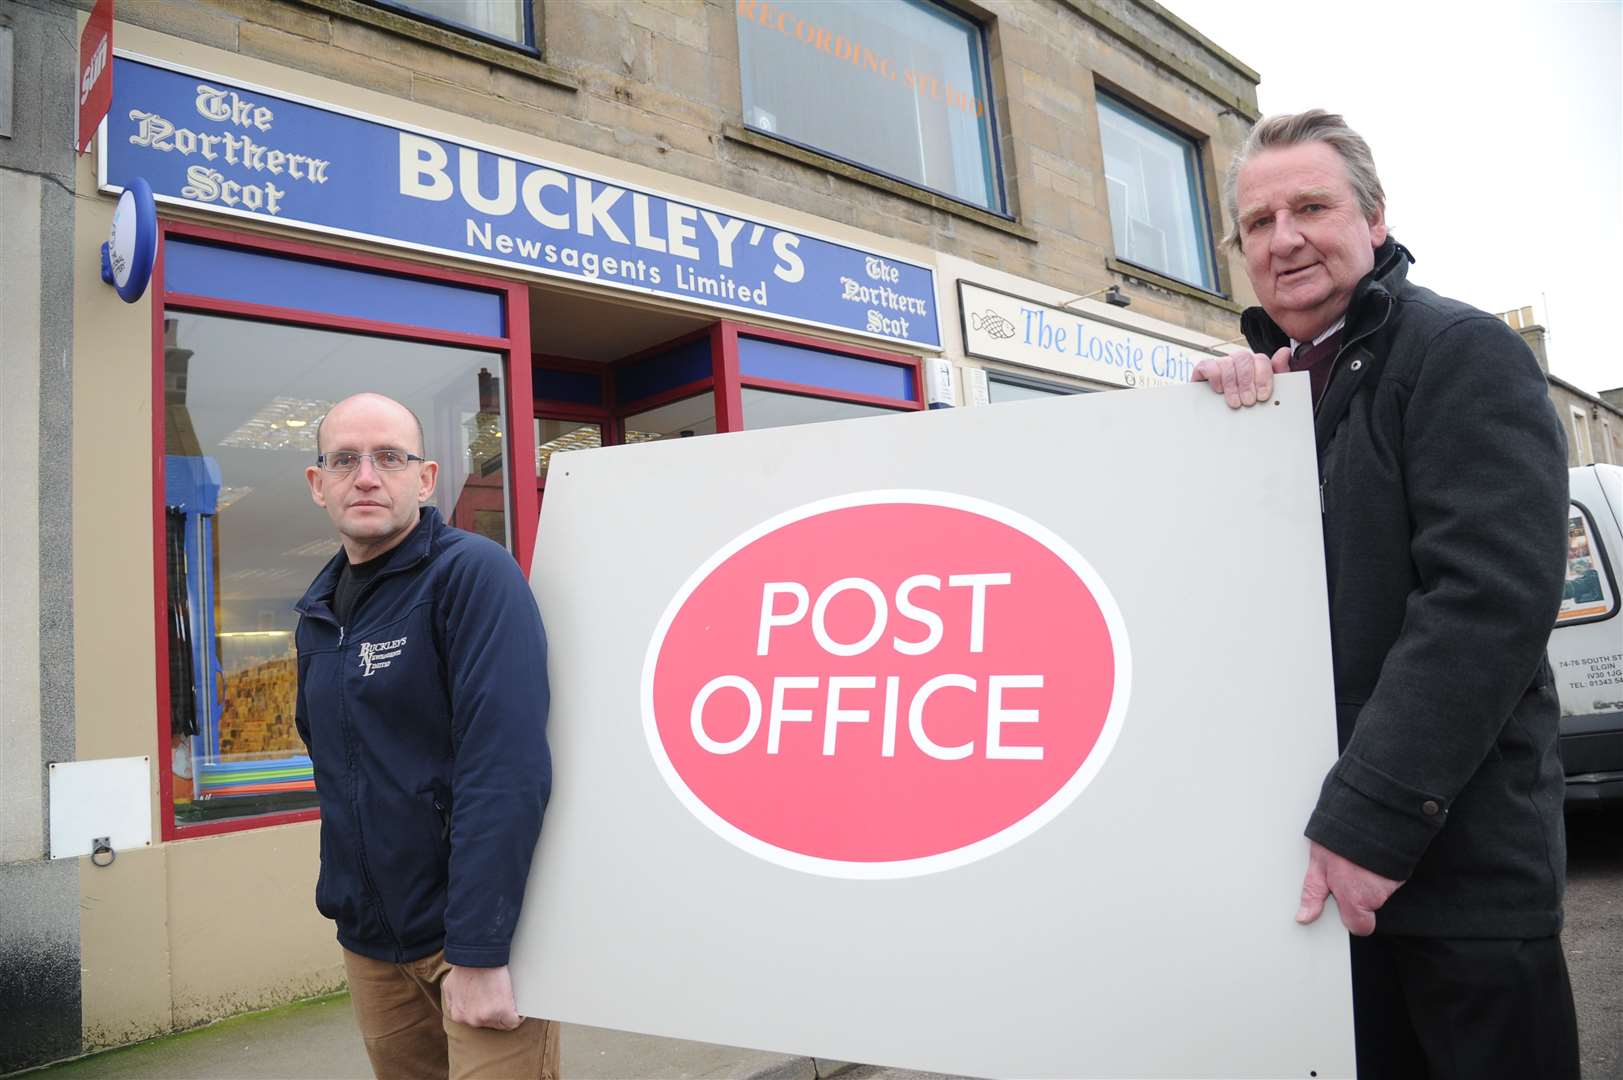 Tony Rook (left) spoke on the issue of cash running out at Lossiemouth's ATMs